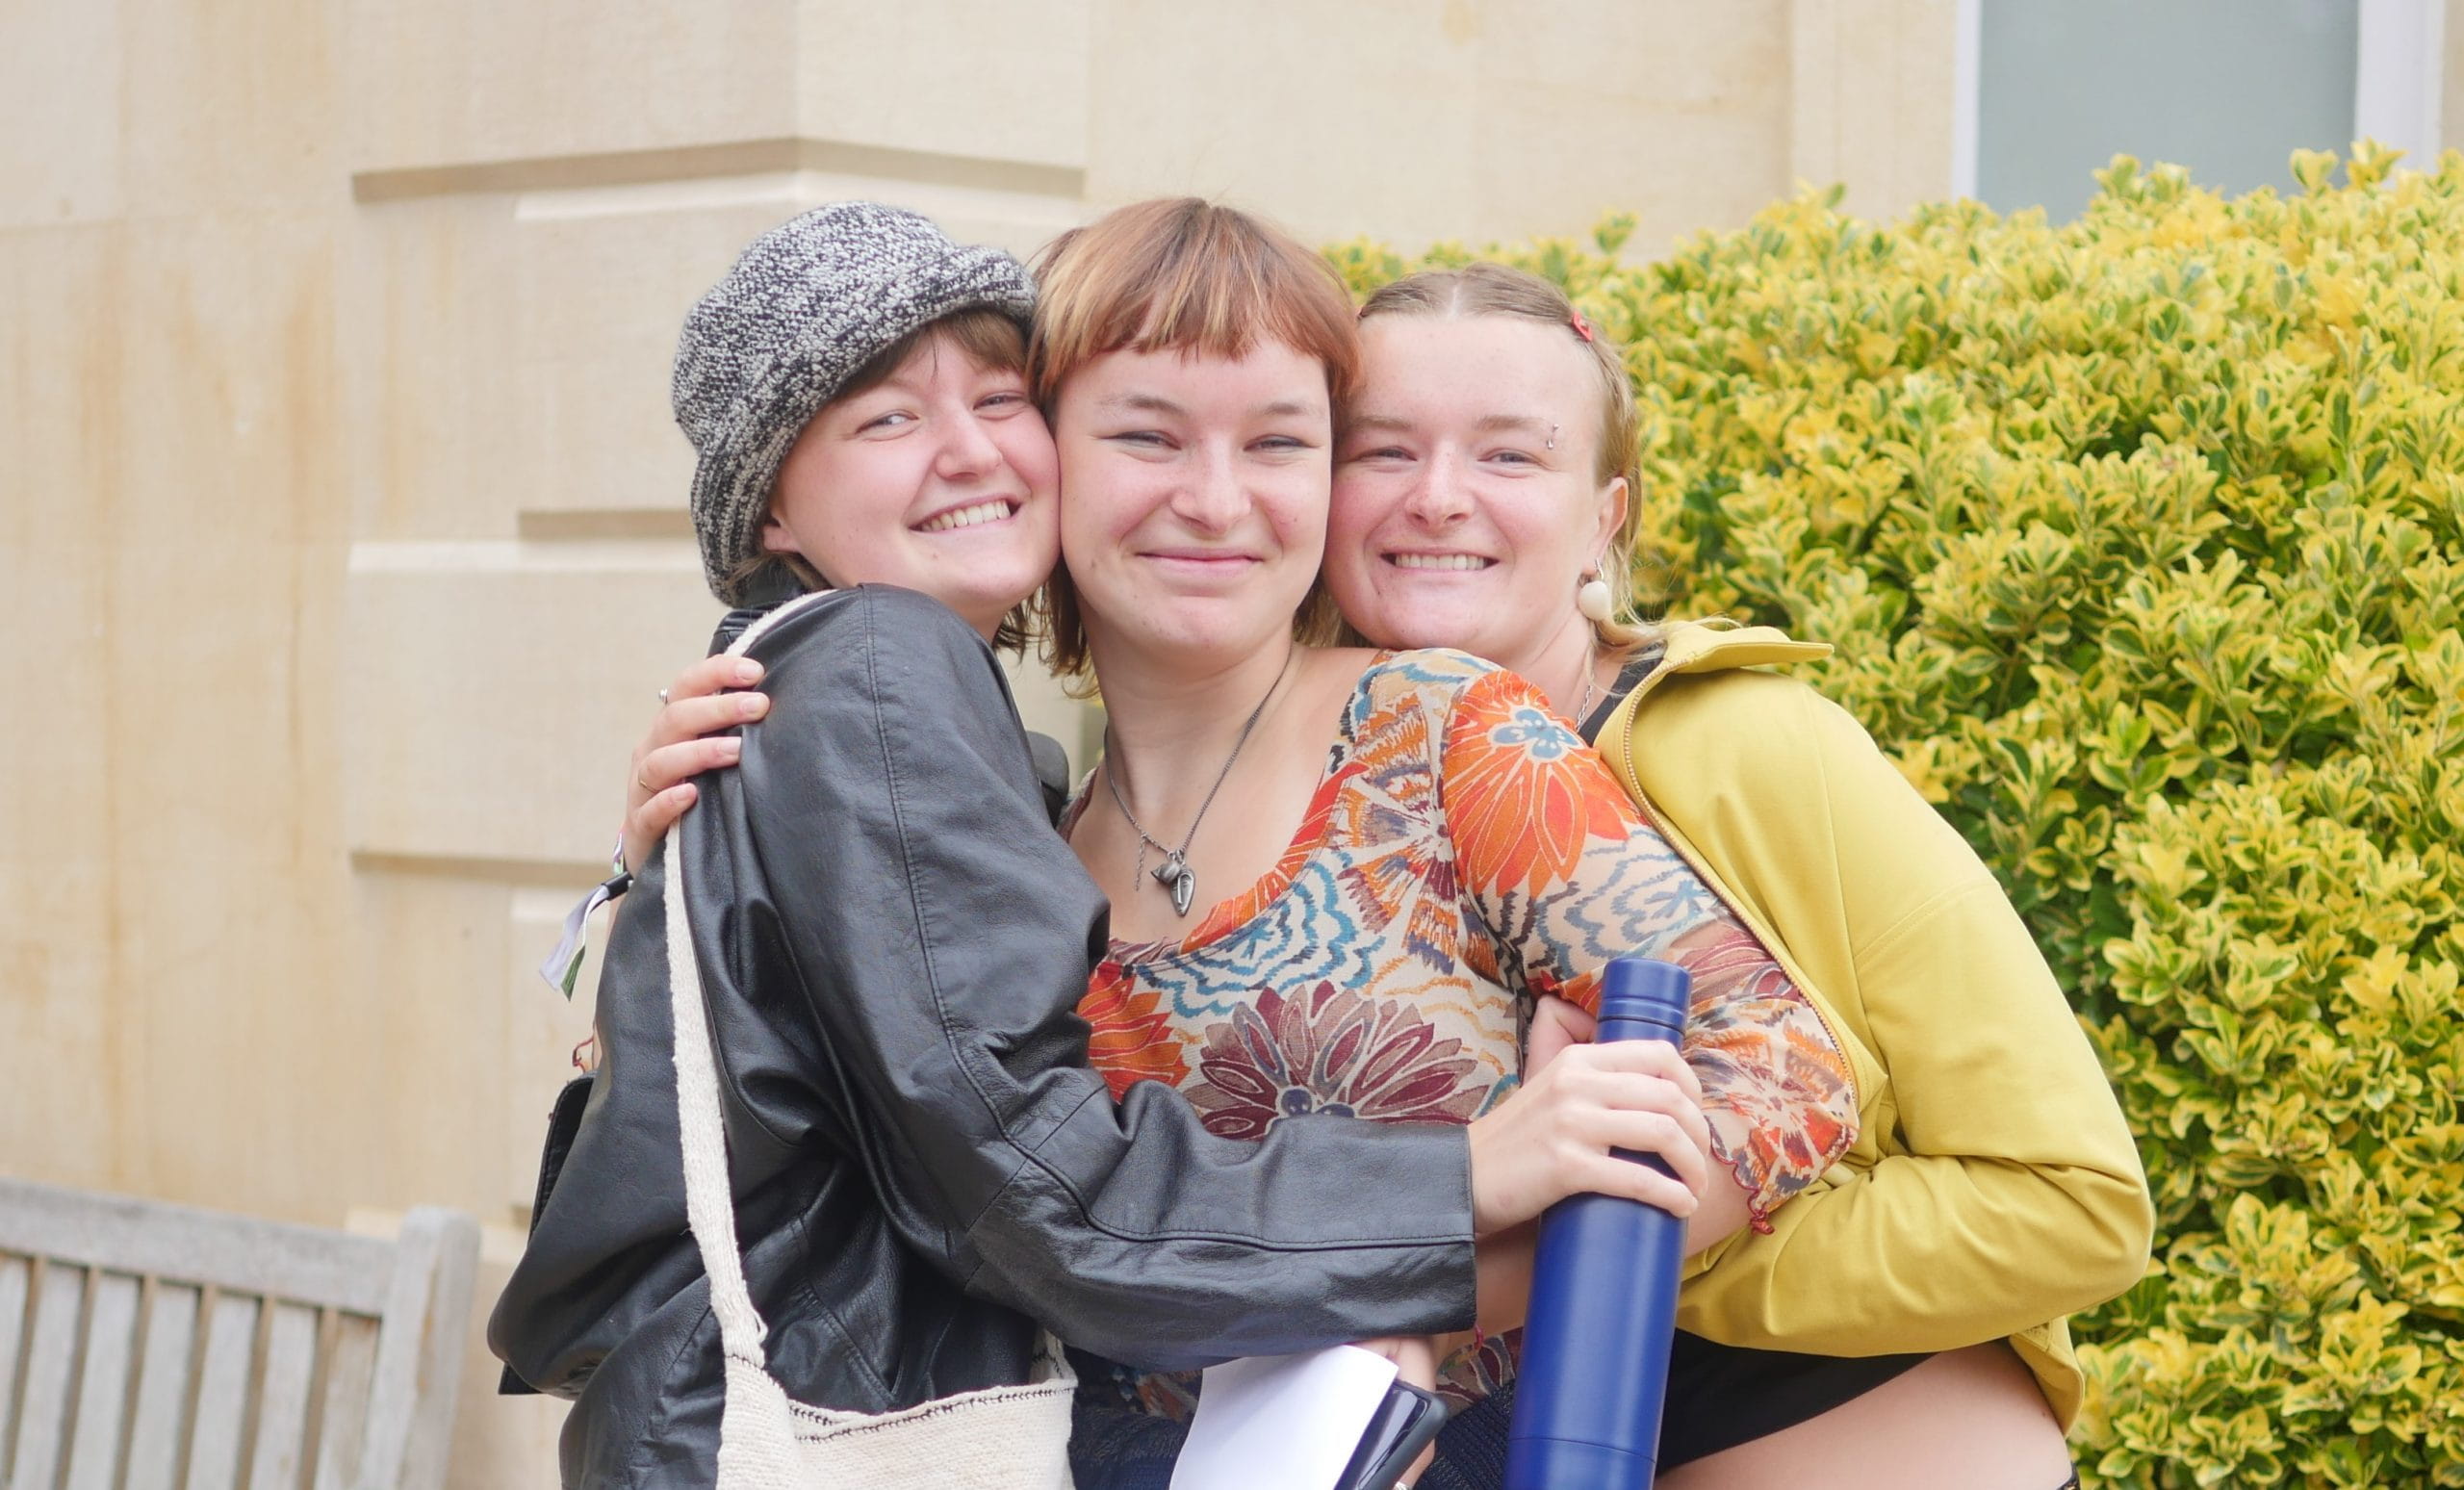 A-Level Results 2022-a-level-results-2022-P1640501-scaled-e1660824137920